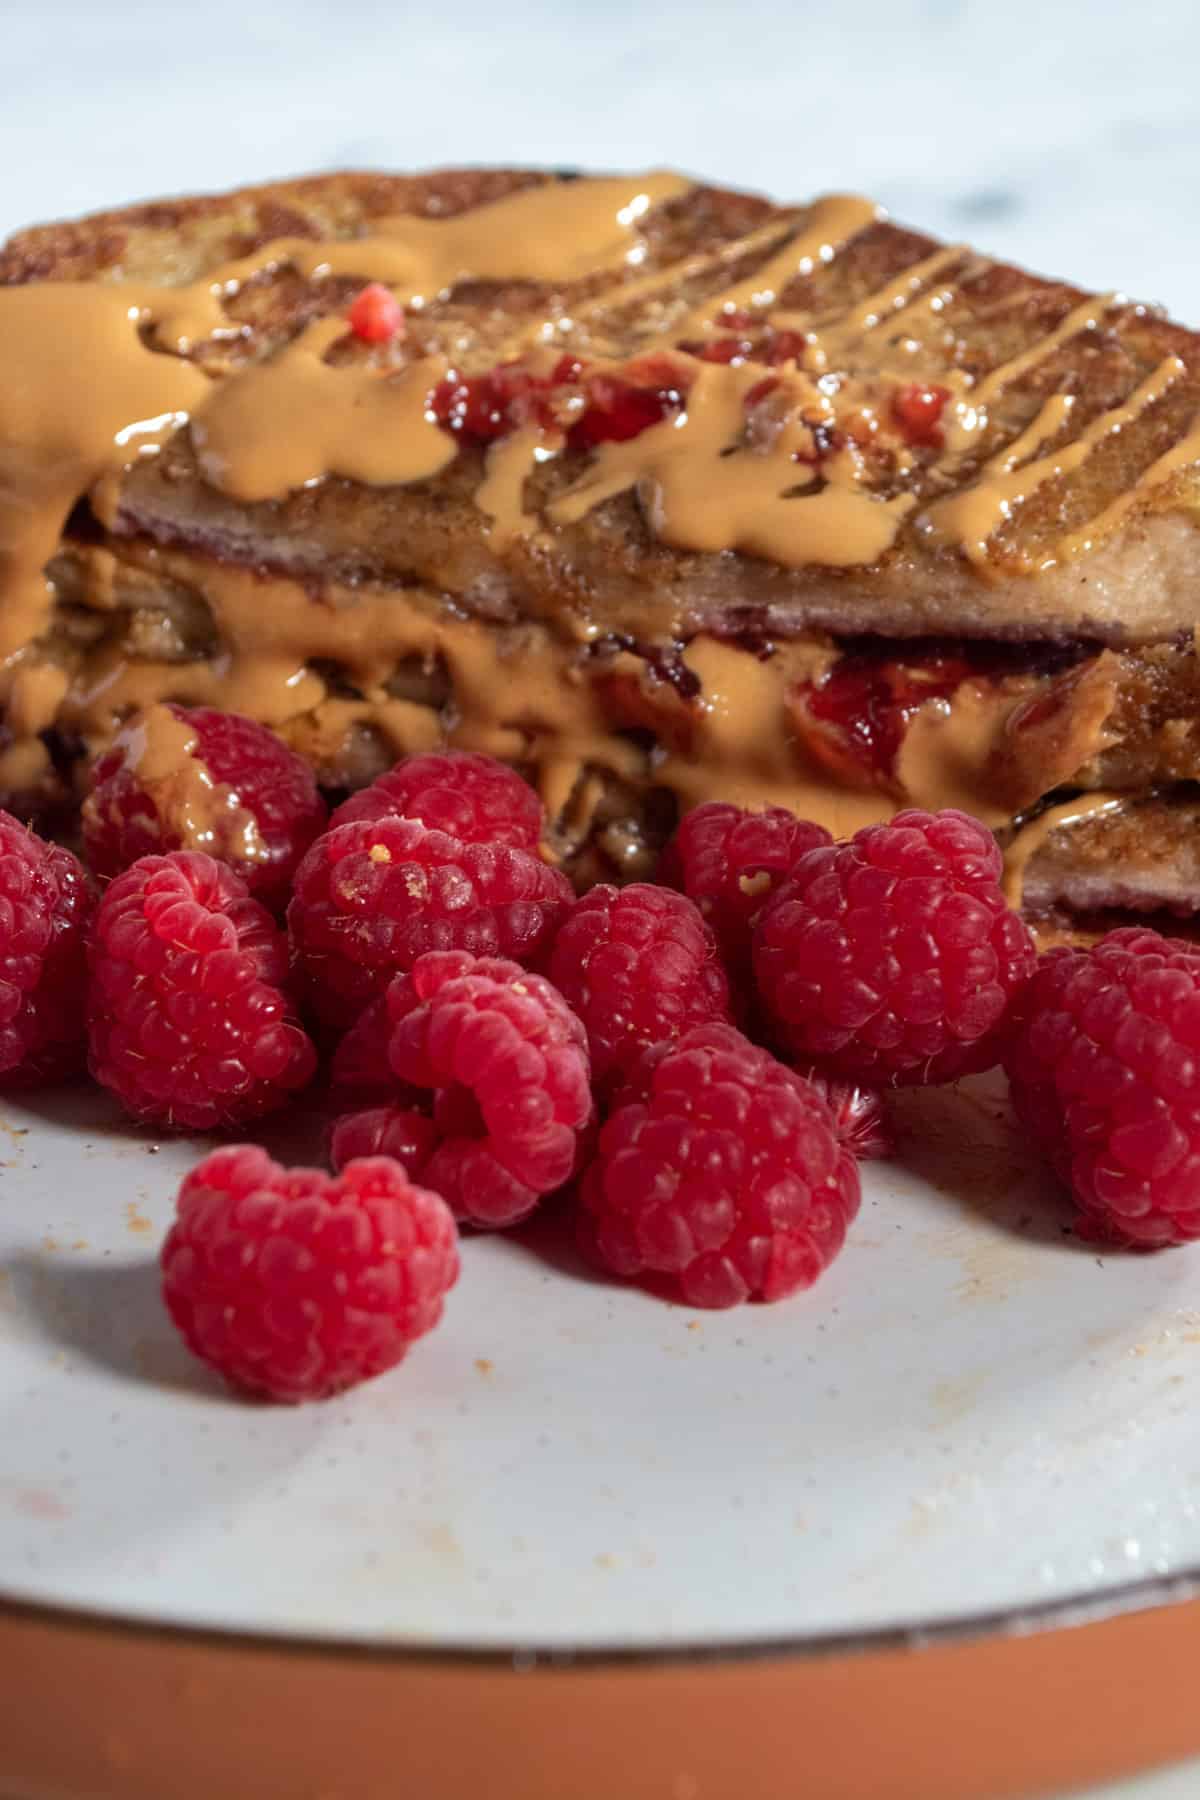 A golden brown French toast sandwich covered in lots of raspberries and melted peanut butter.